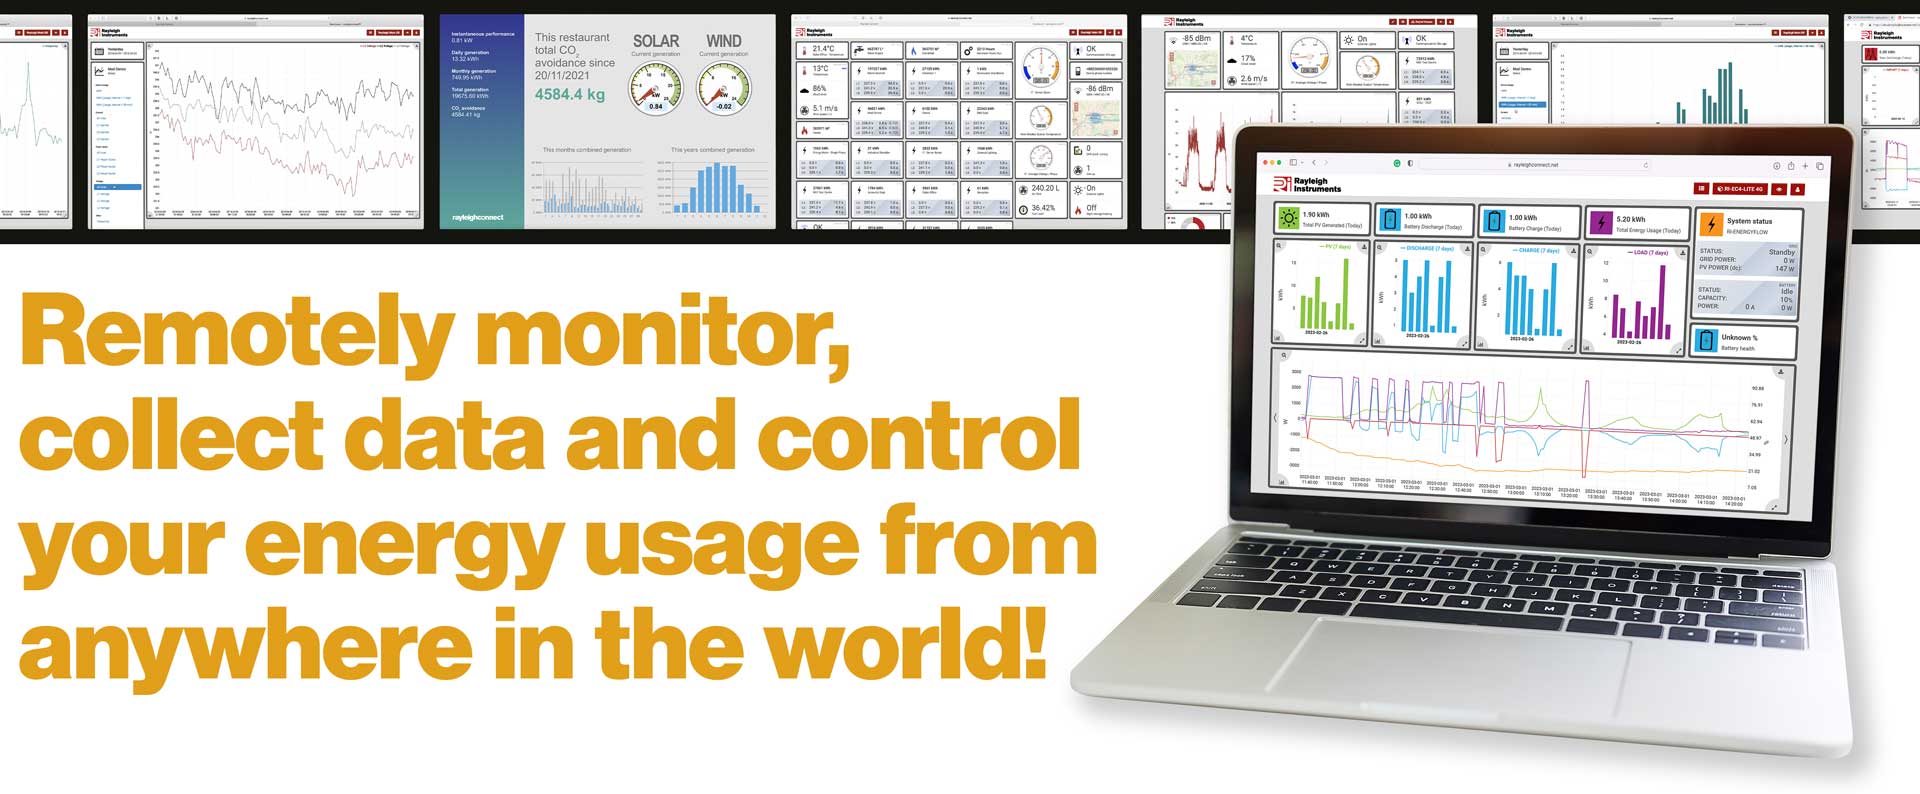 Remotely monitor, collect data and control your energy usage from anywhere in the world!